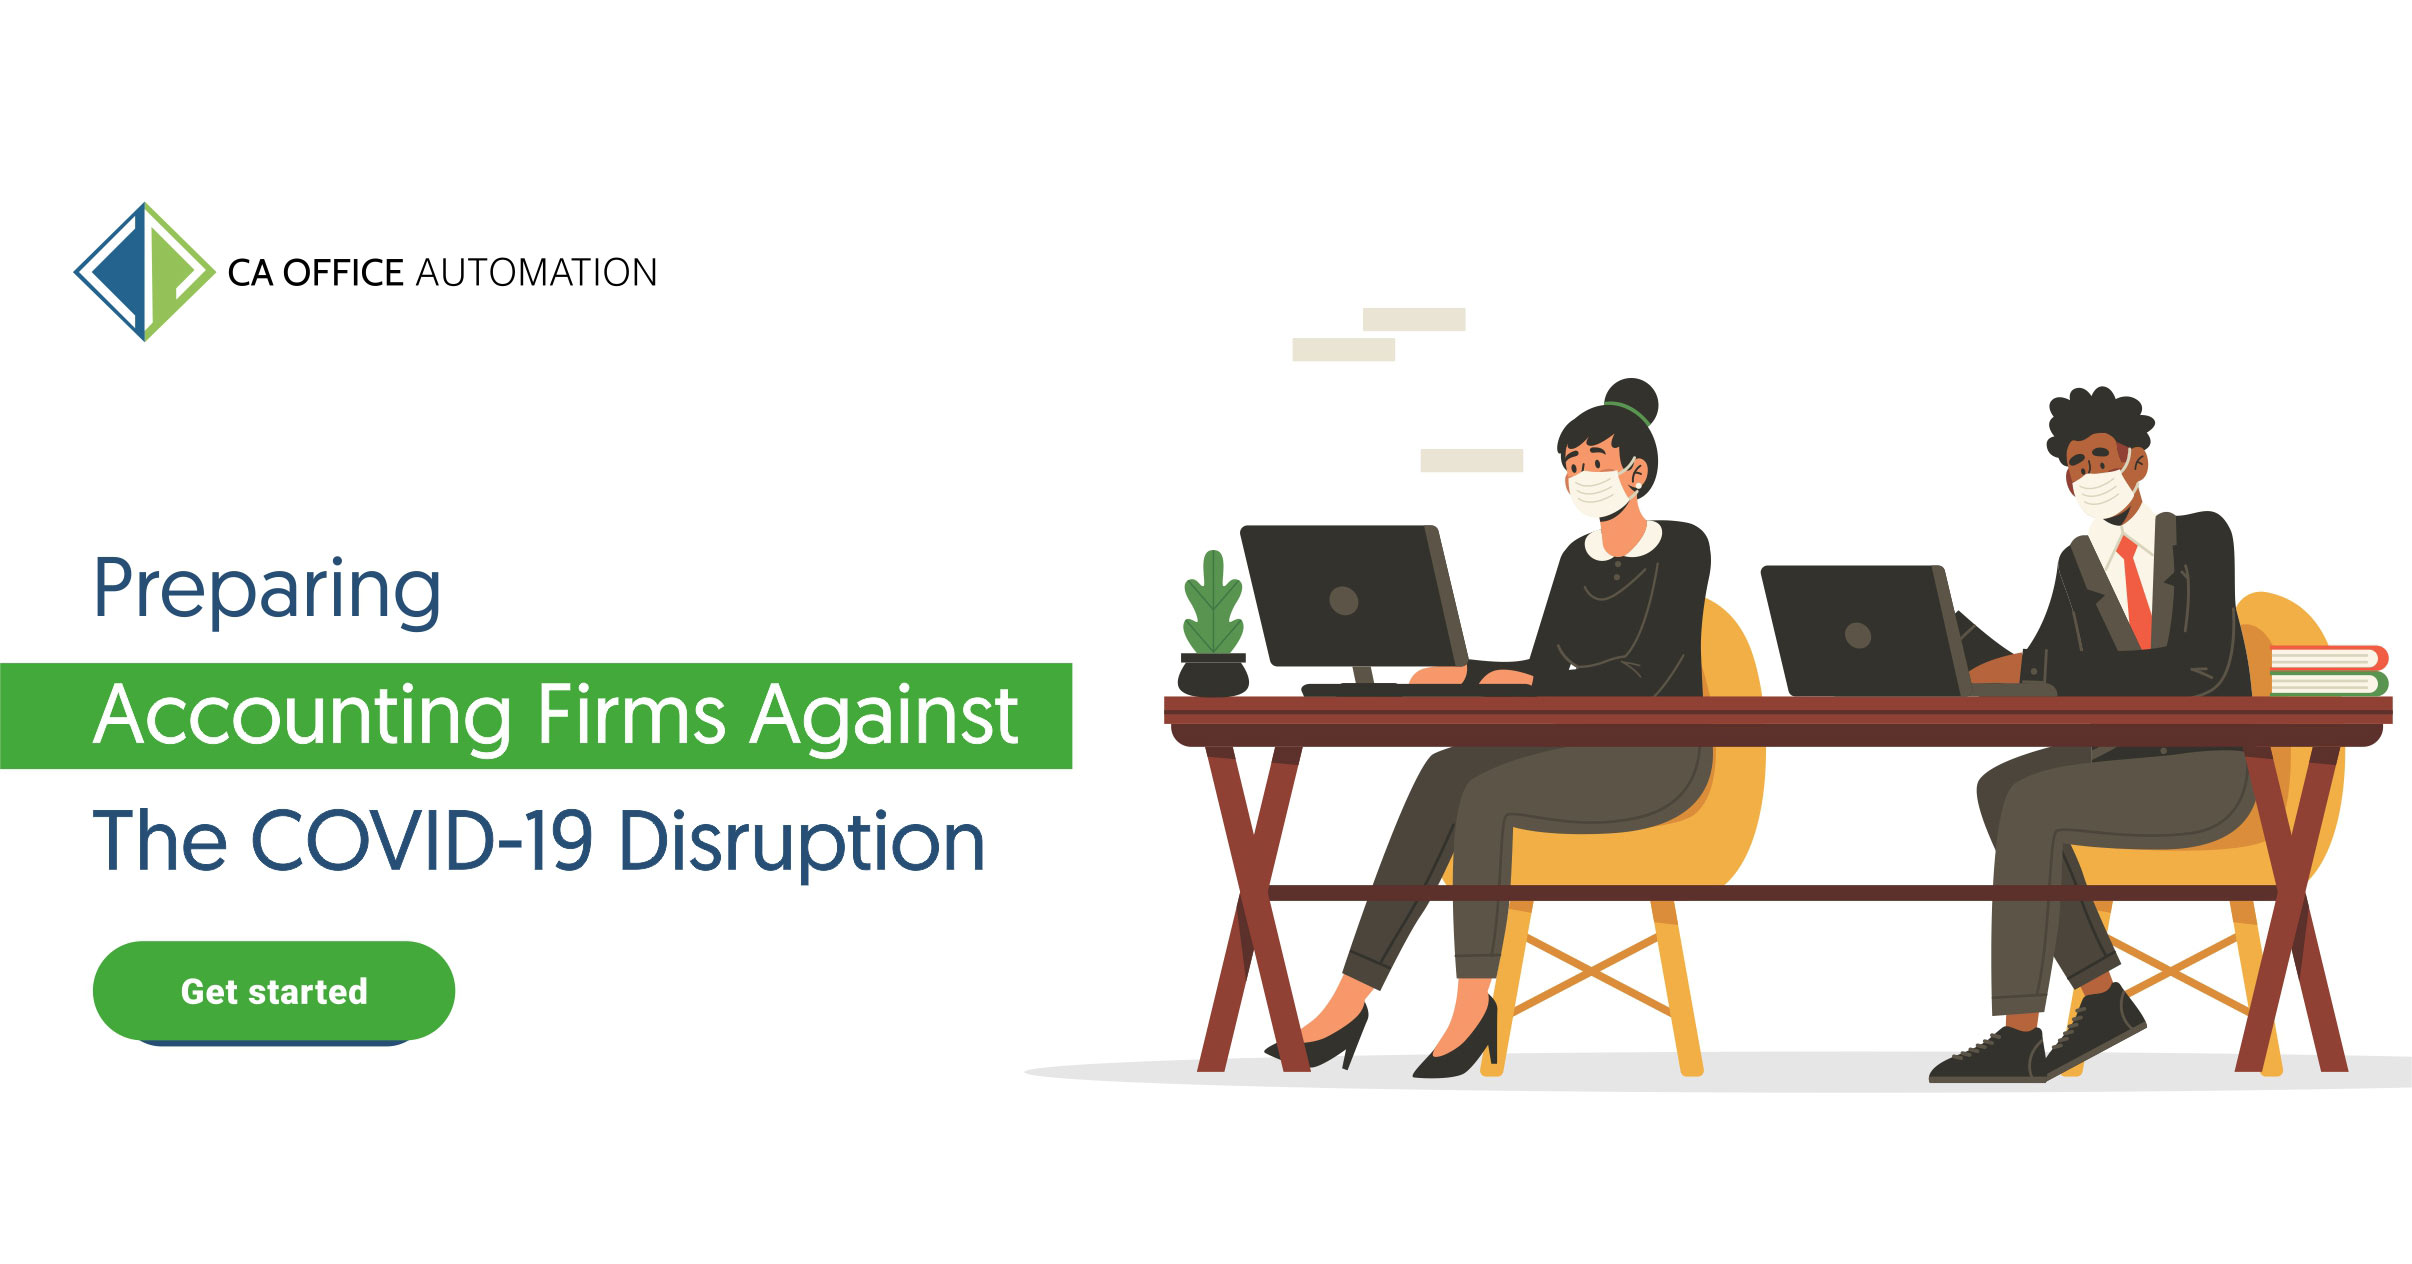 Preparing Accounting Firms Against the COVID-19 Disruption